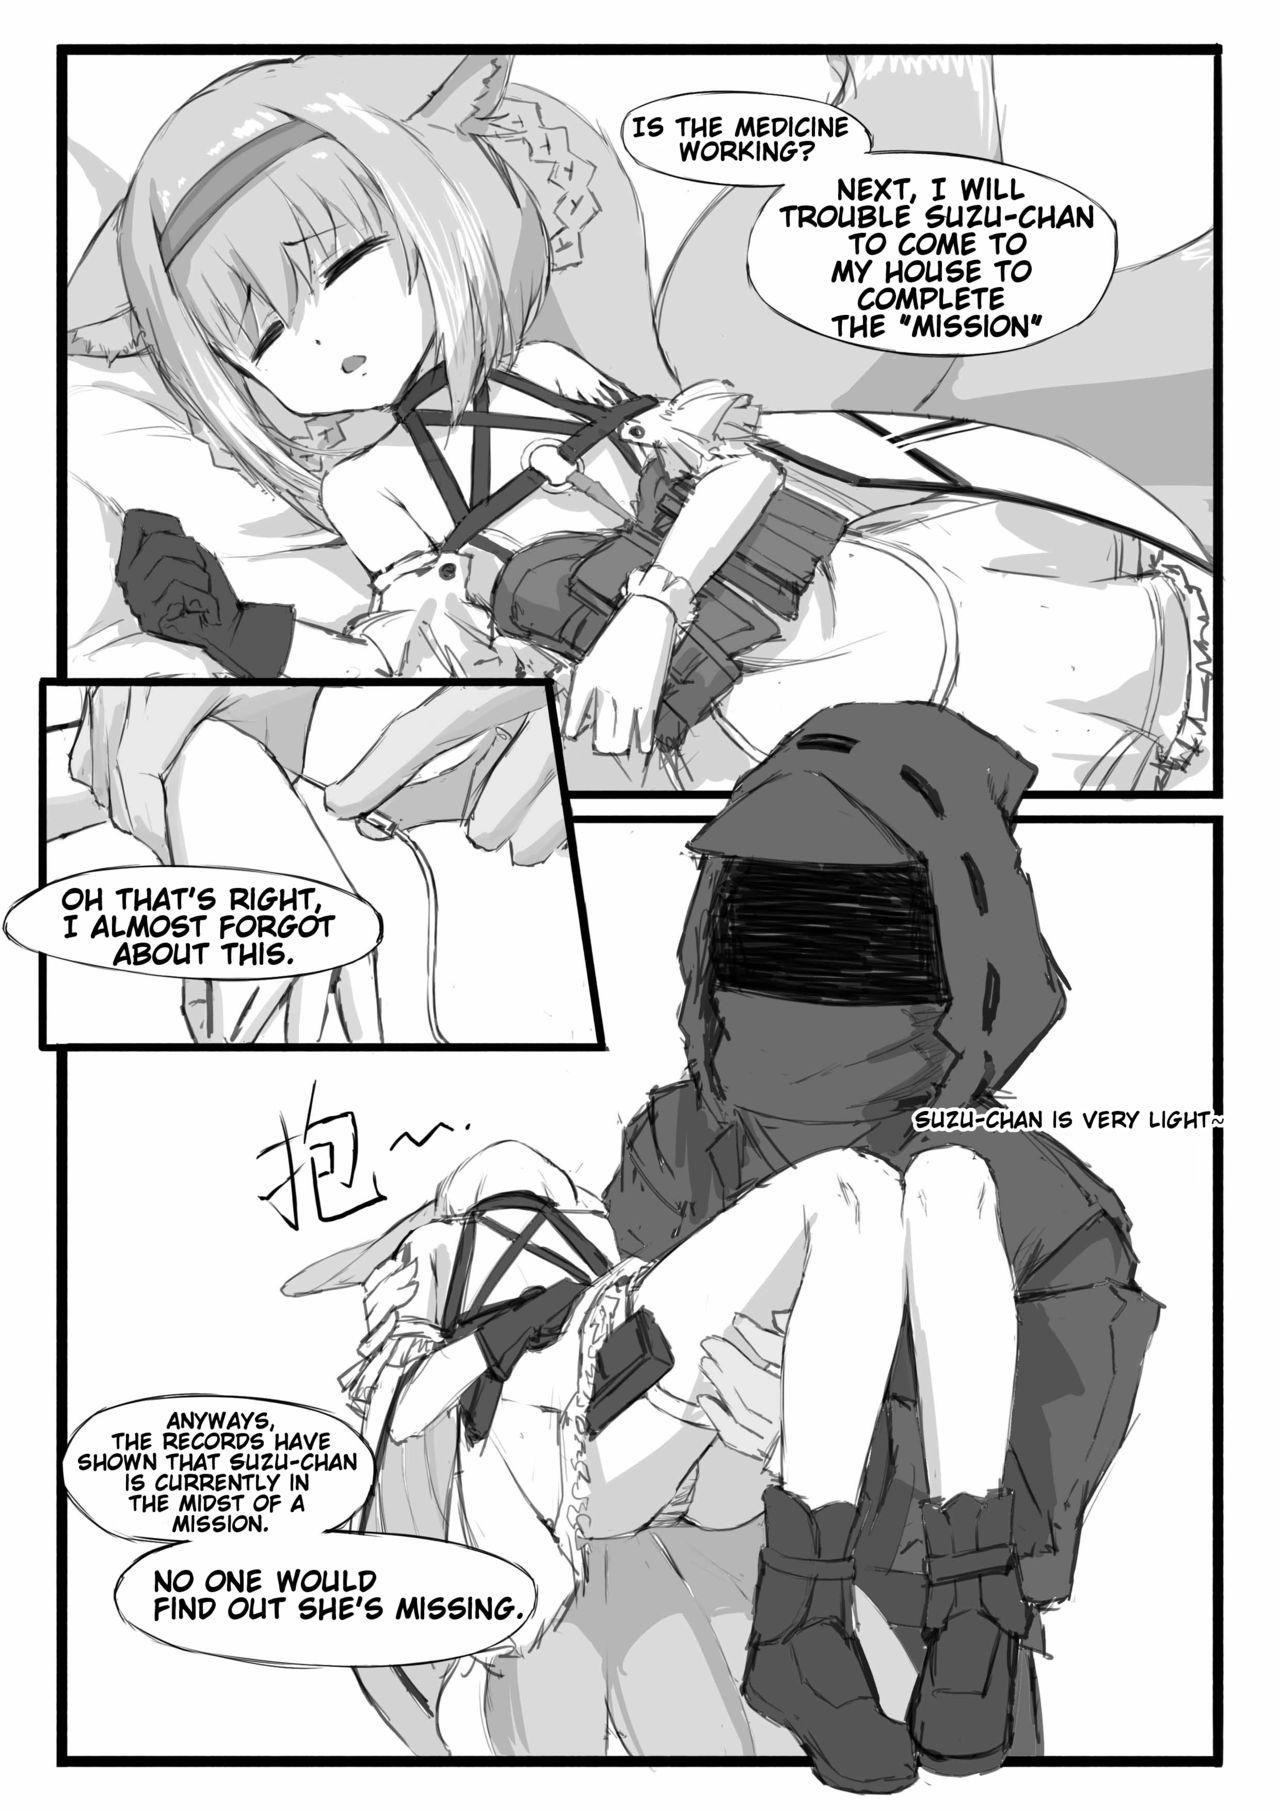 Older Suzuran's Solo Mission - Arknights Monstercock - Page 8